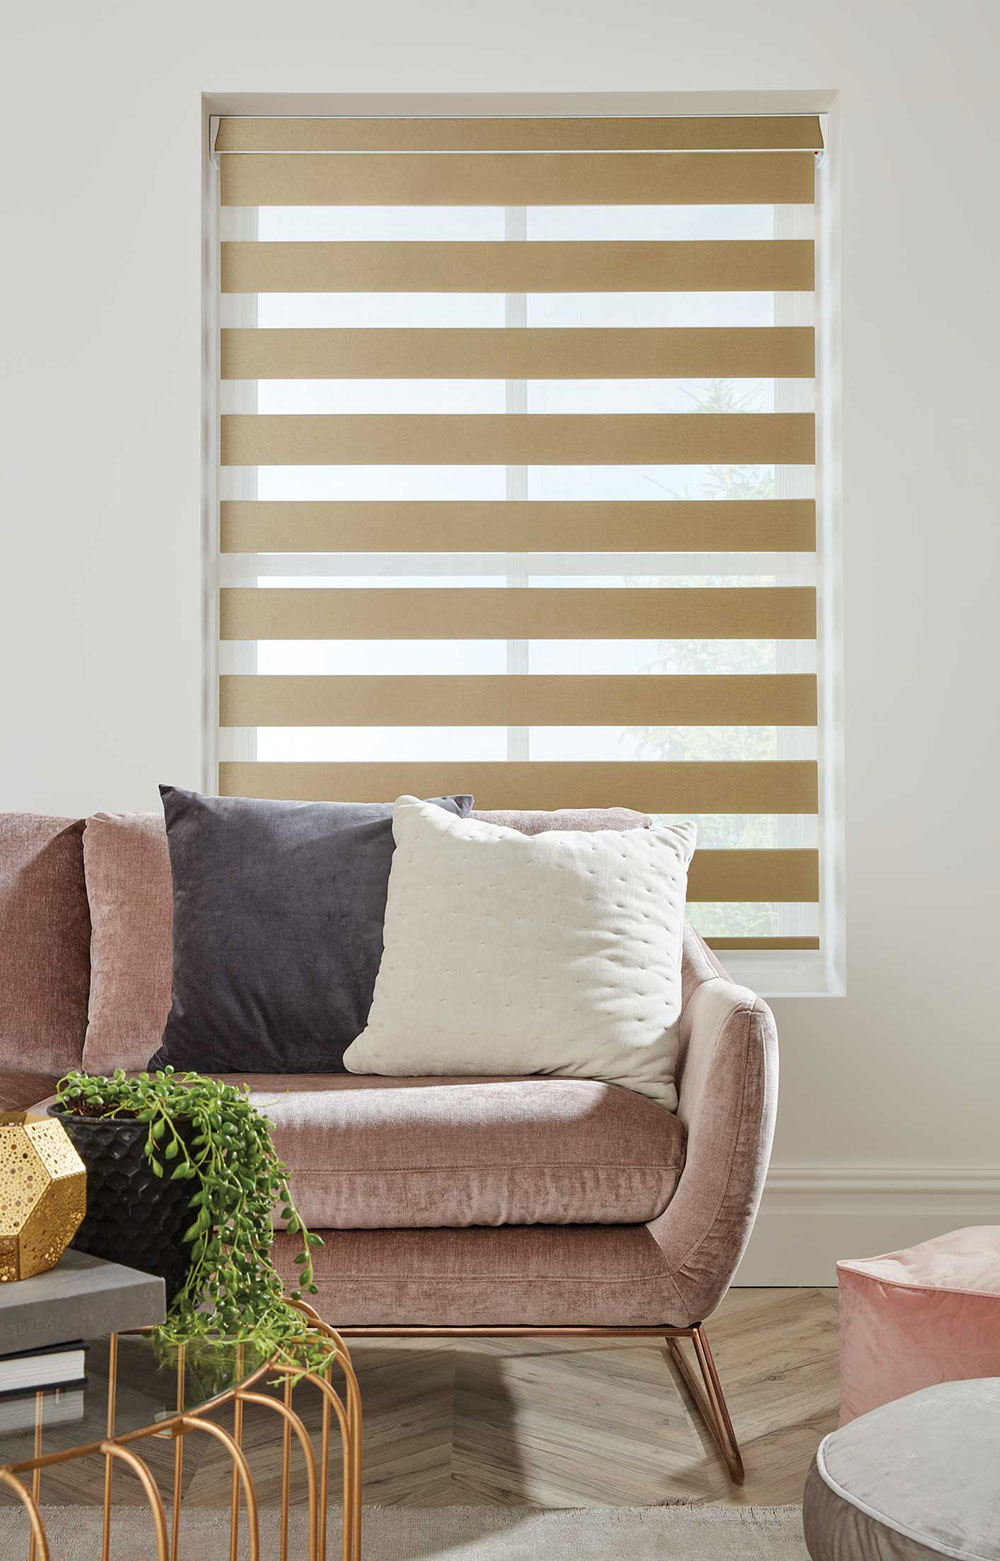 Beige Duo Vision blinds in a living area shown on a tall window beehind a sofa.